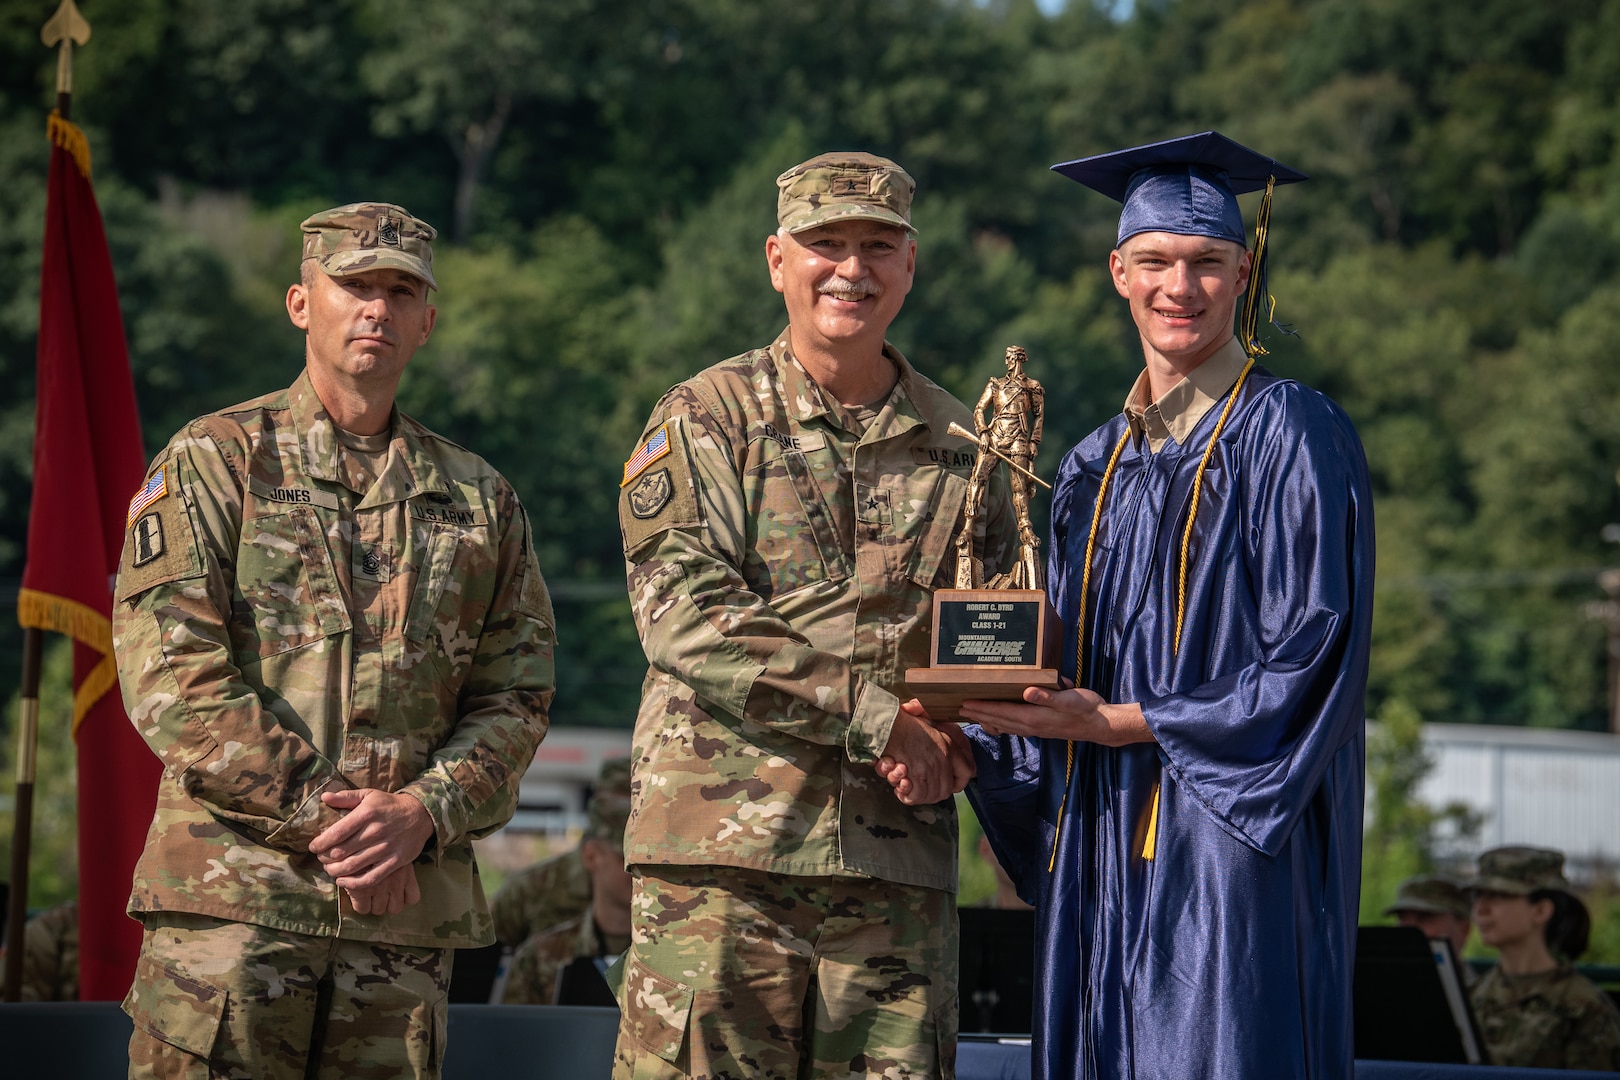 Cadet William Farkas receives the Robert C. Byrd Award from Brig. Gen. William "Bill" Crane, Adjutant General of the West Virginia National Guard, during graduation at the Mountaineer Challenge Academy in Charleston, W.Va., September 10, 2021. Farkas is hoping to use his time at MCA to further his pursuit of an appointment to West Point. (U.S. Army National Guard Photo by Edwin Wriston)